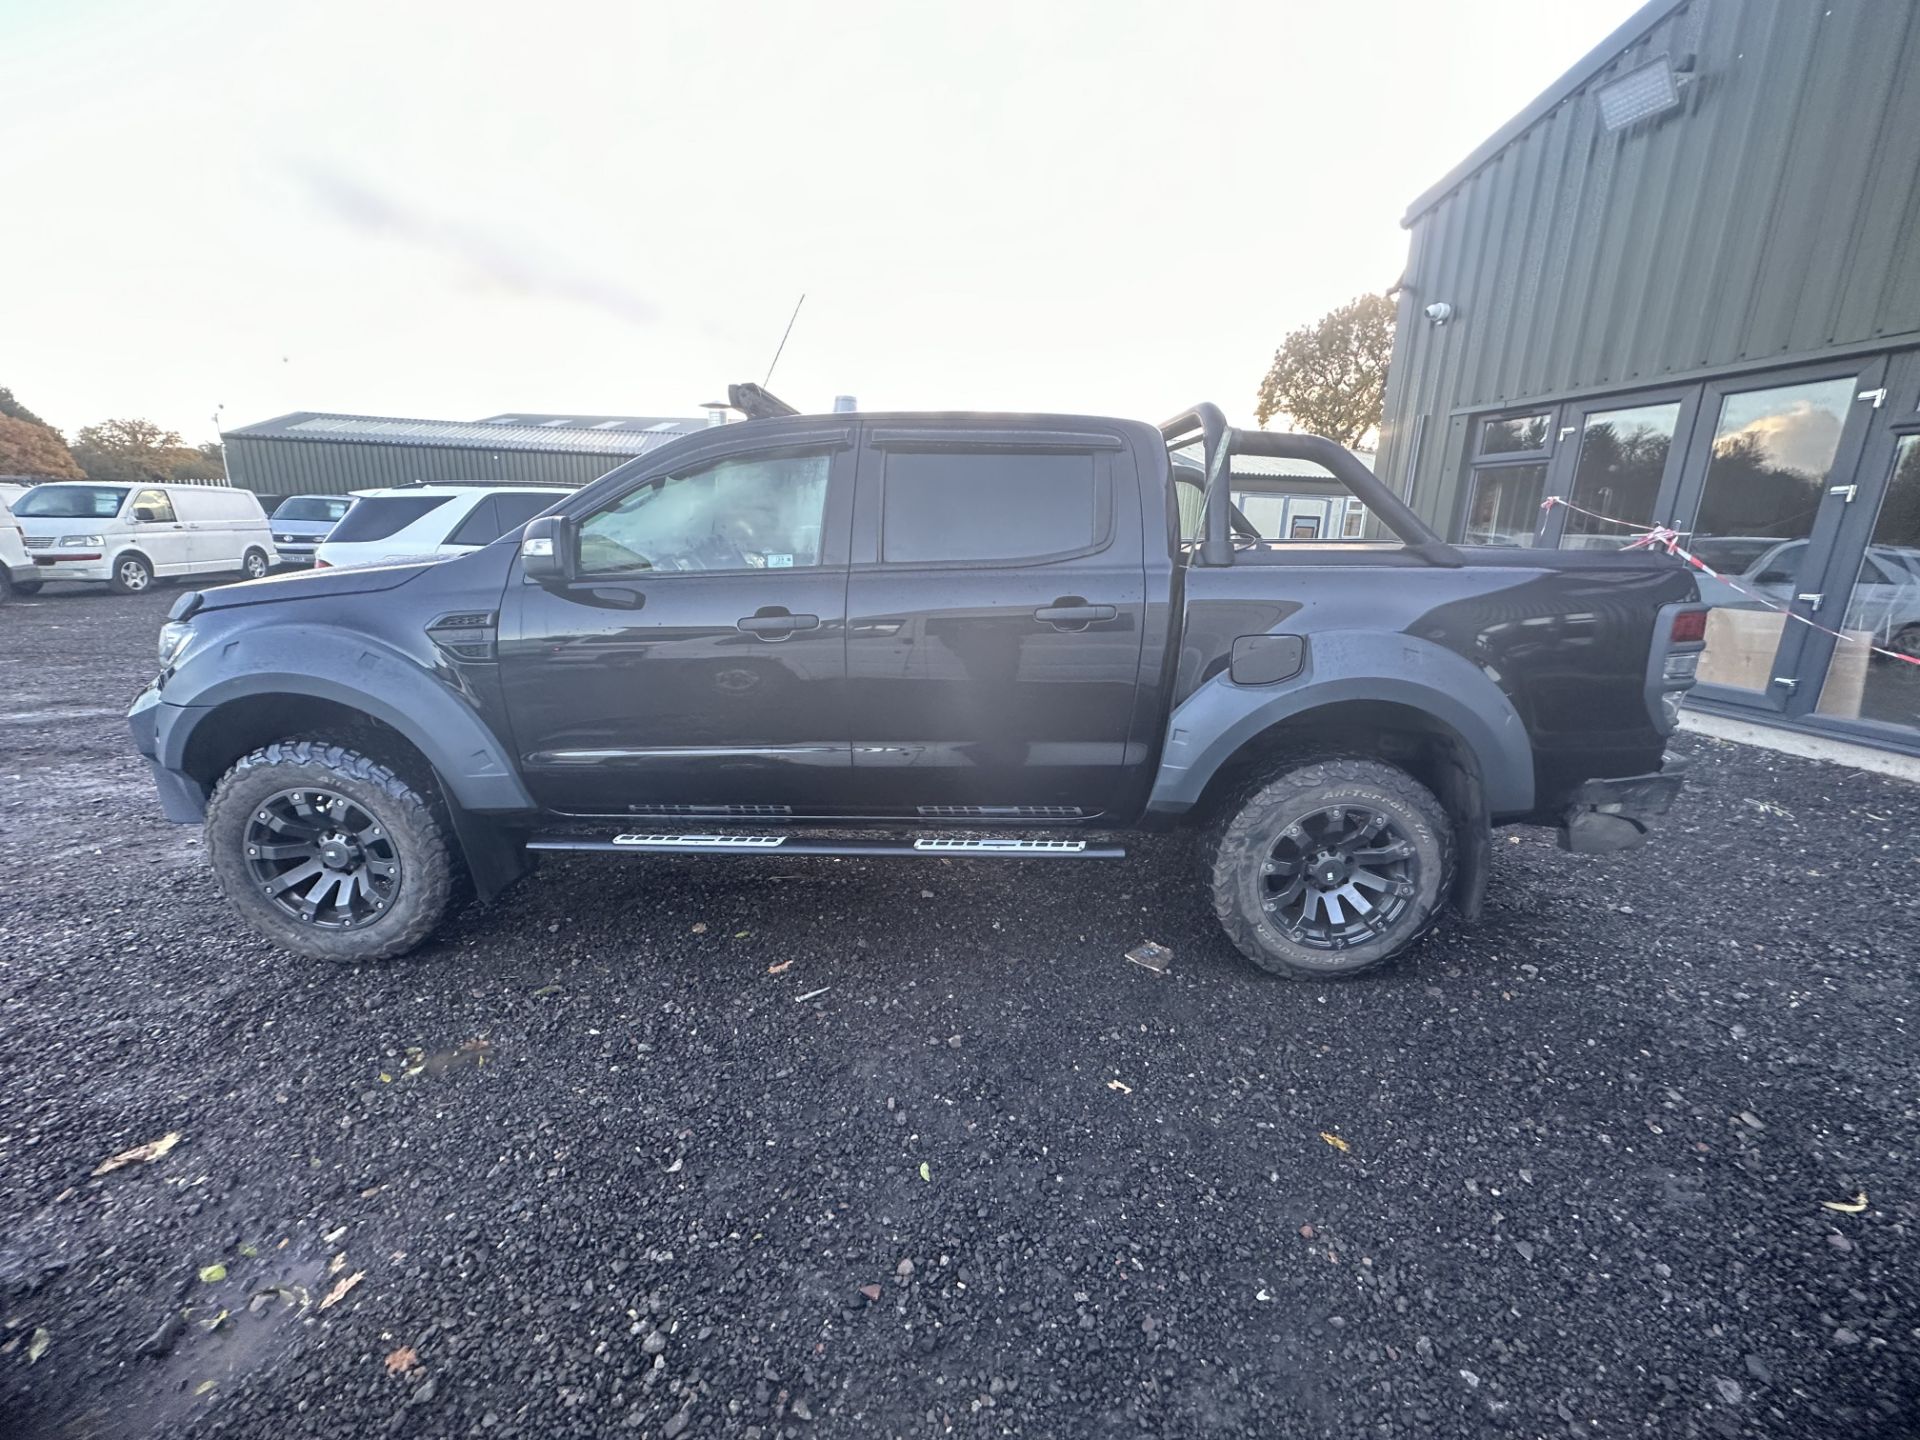 OV66RMO Model: 66 PLATE FORD RANGER LIMITED MSRT 4X4 3.2 TDCI AUTOMATIC - Image 15 of 23